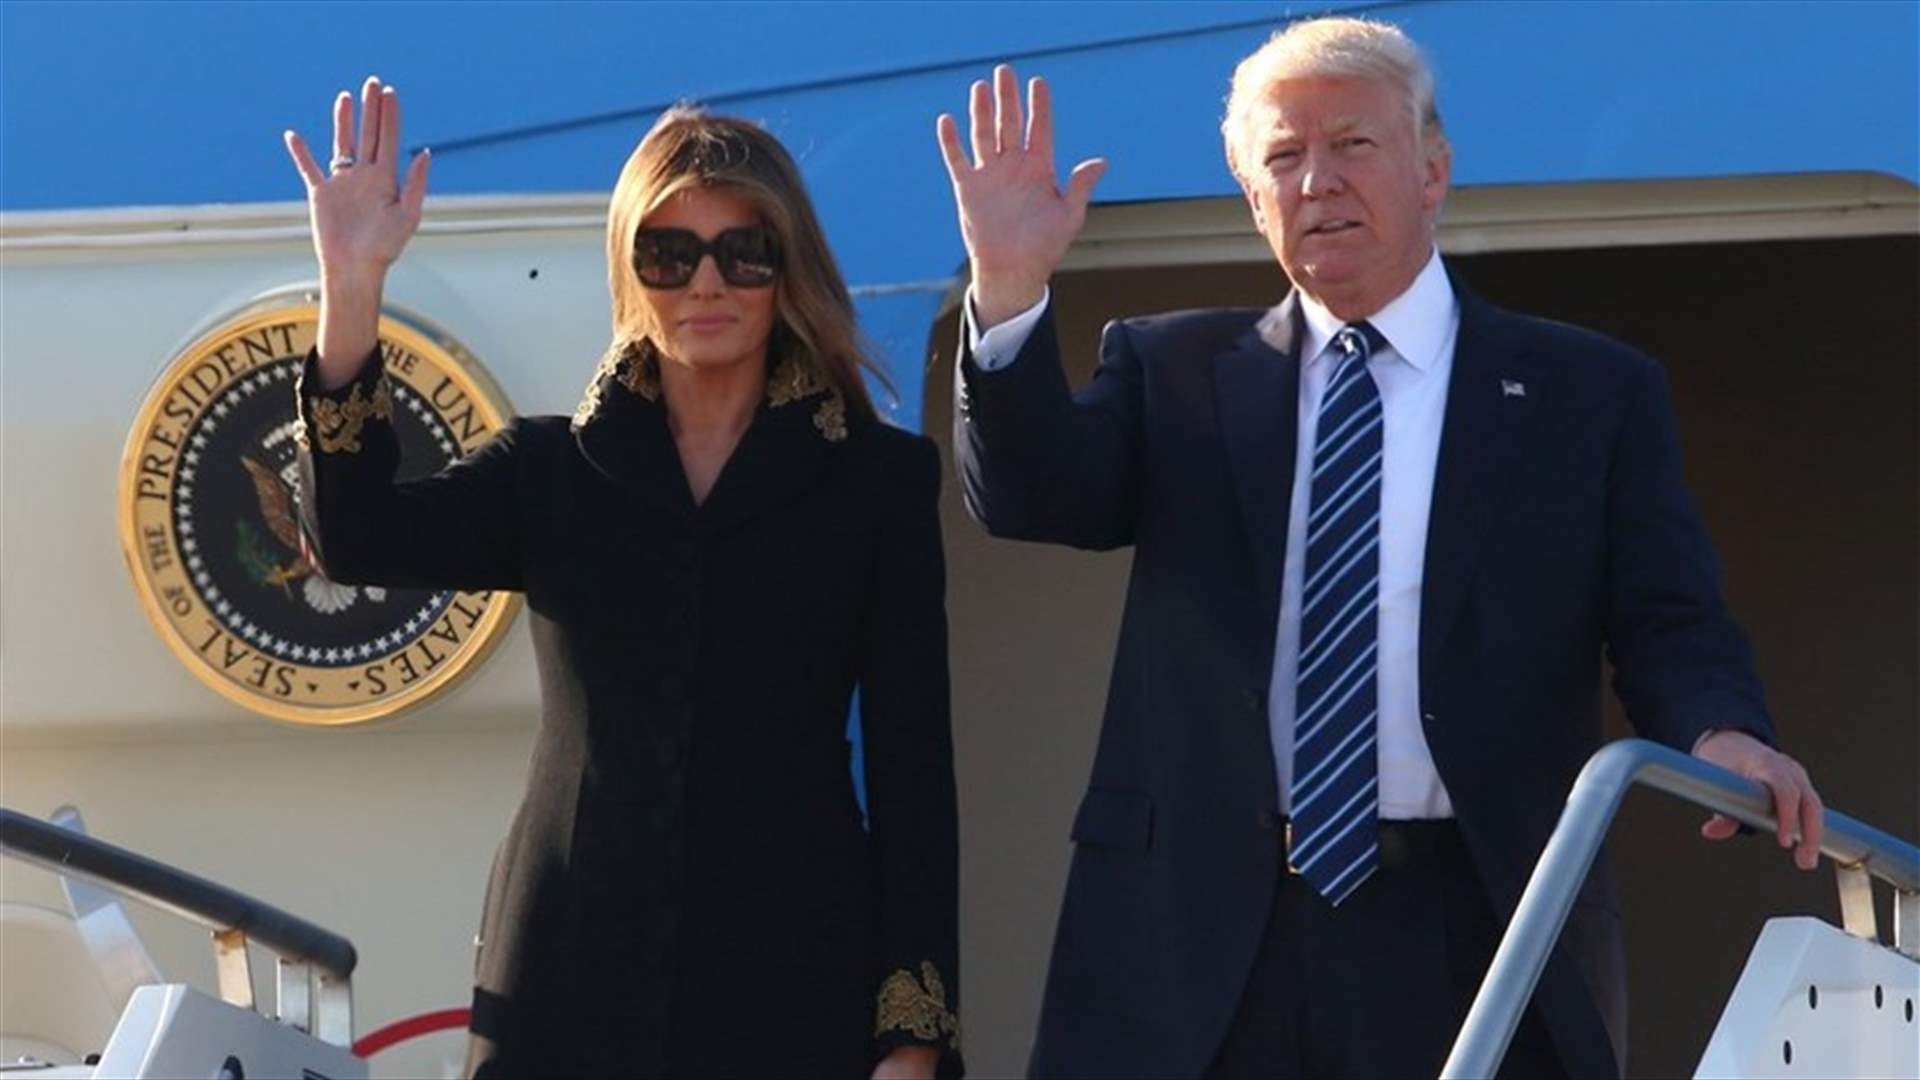 US President Donald Trump arrives in Italy on flight from Israel